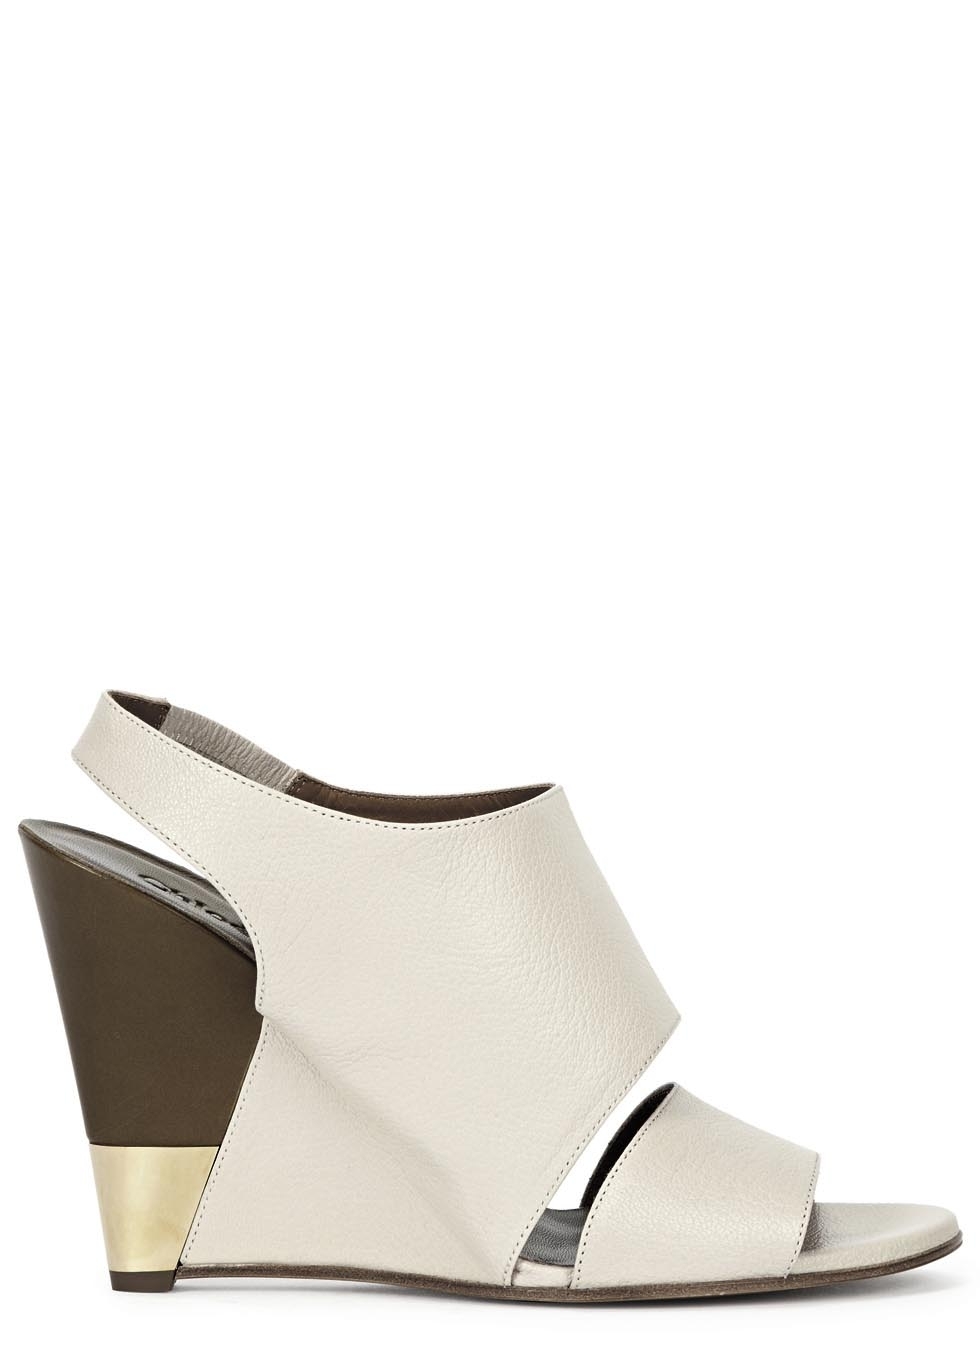 Off white leather wedge sandals